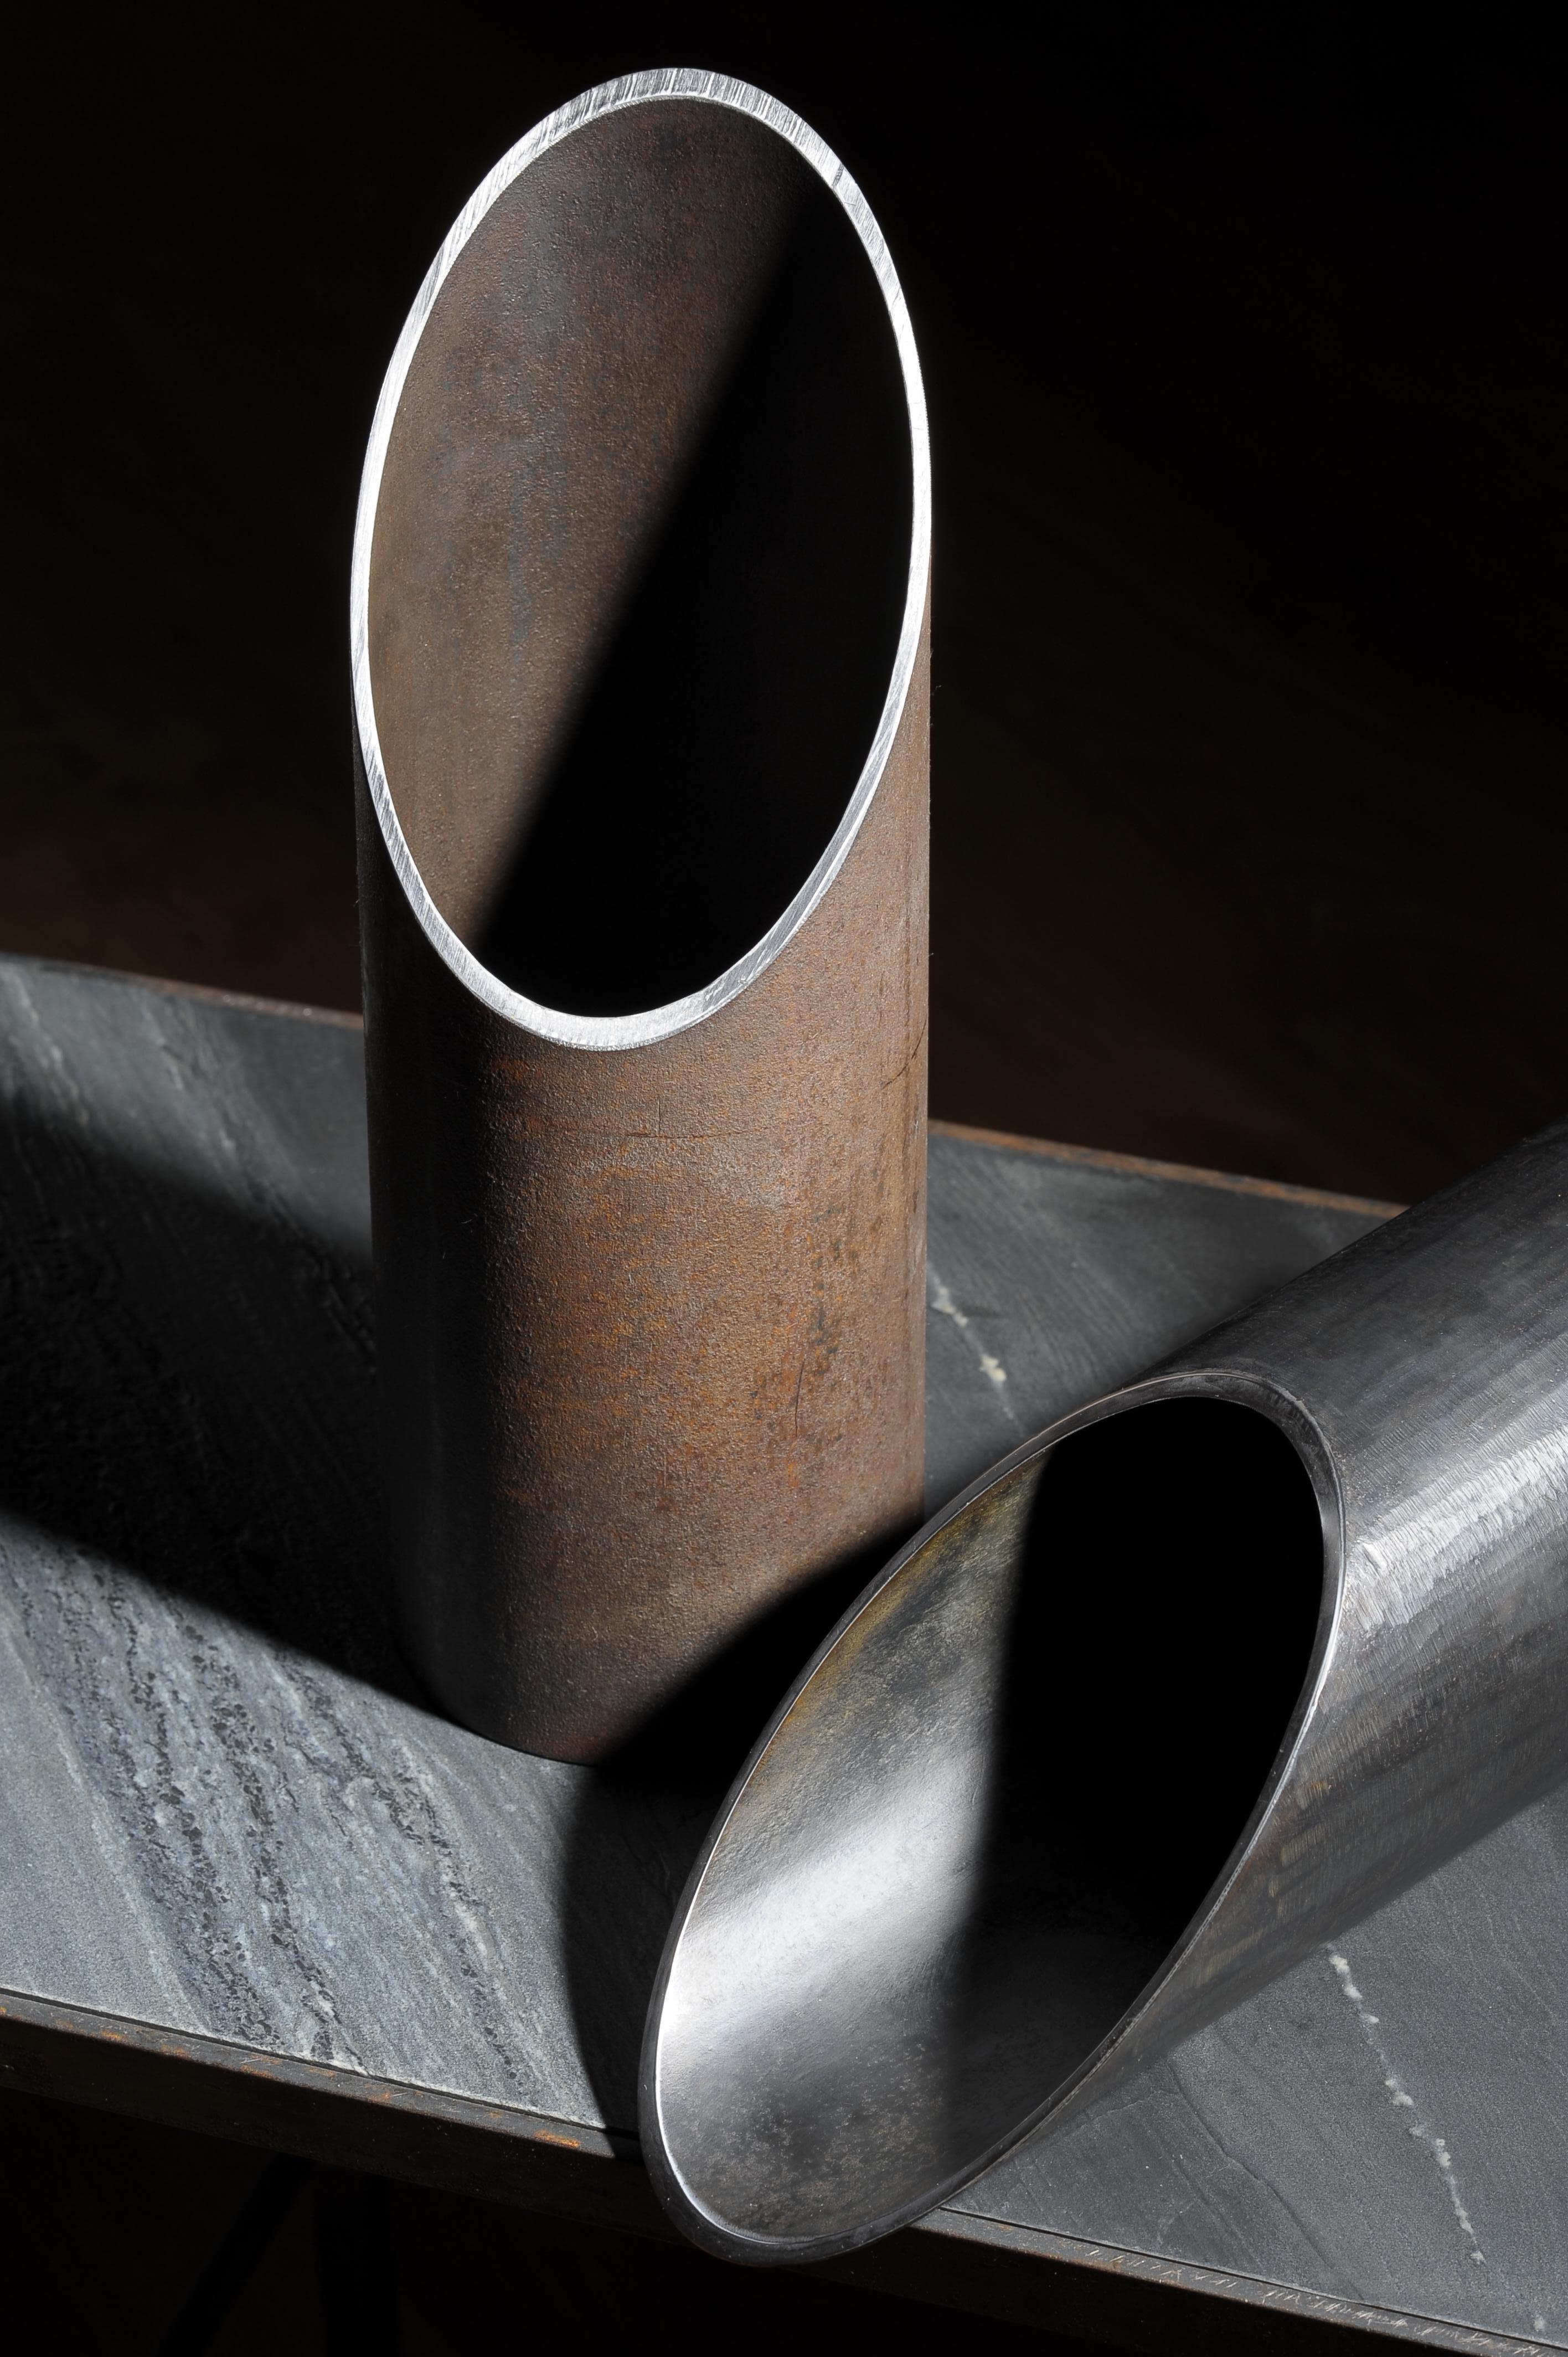 Post-Modern Pipe, Pair of Steel Sculpted Vases, Signed by Lukasz Friedrich